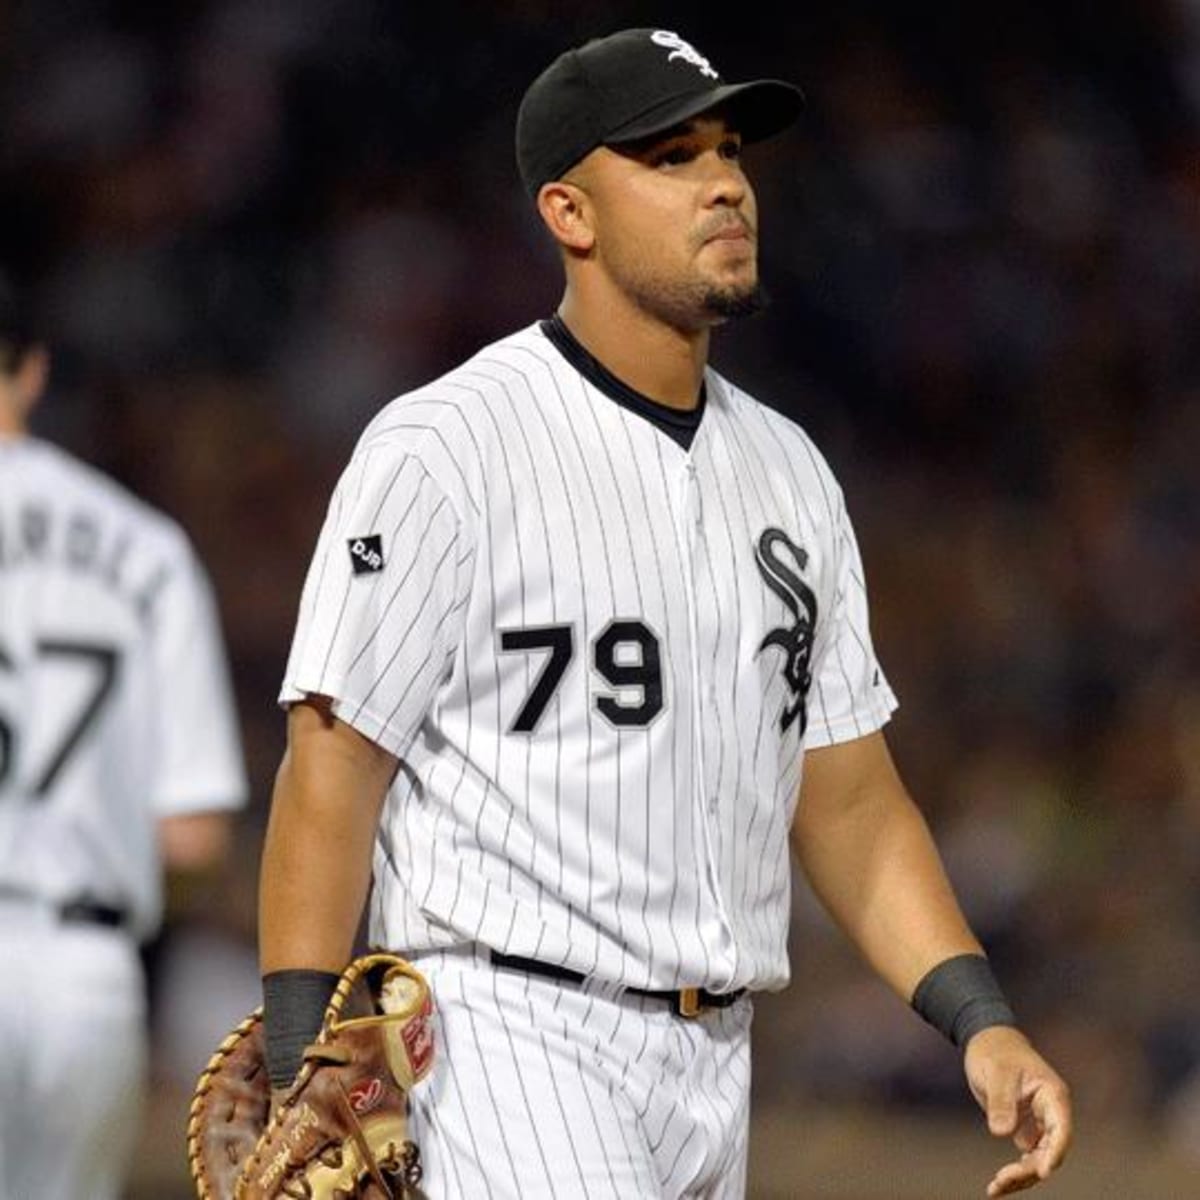 White Sox's Jose Abreu thought he would drown defecting from Cuba